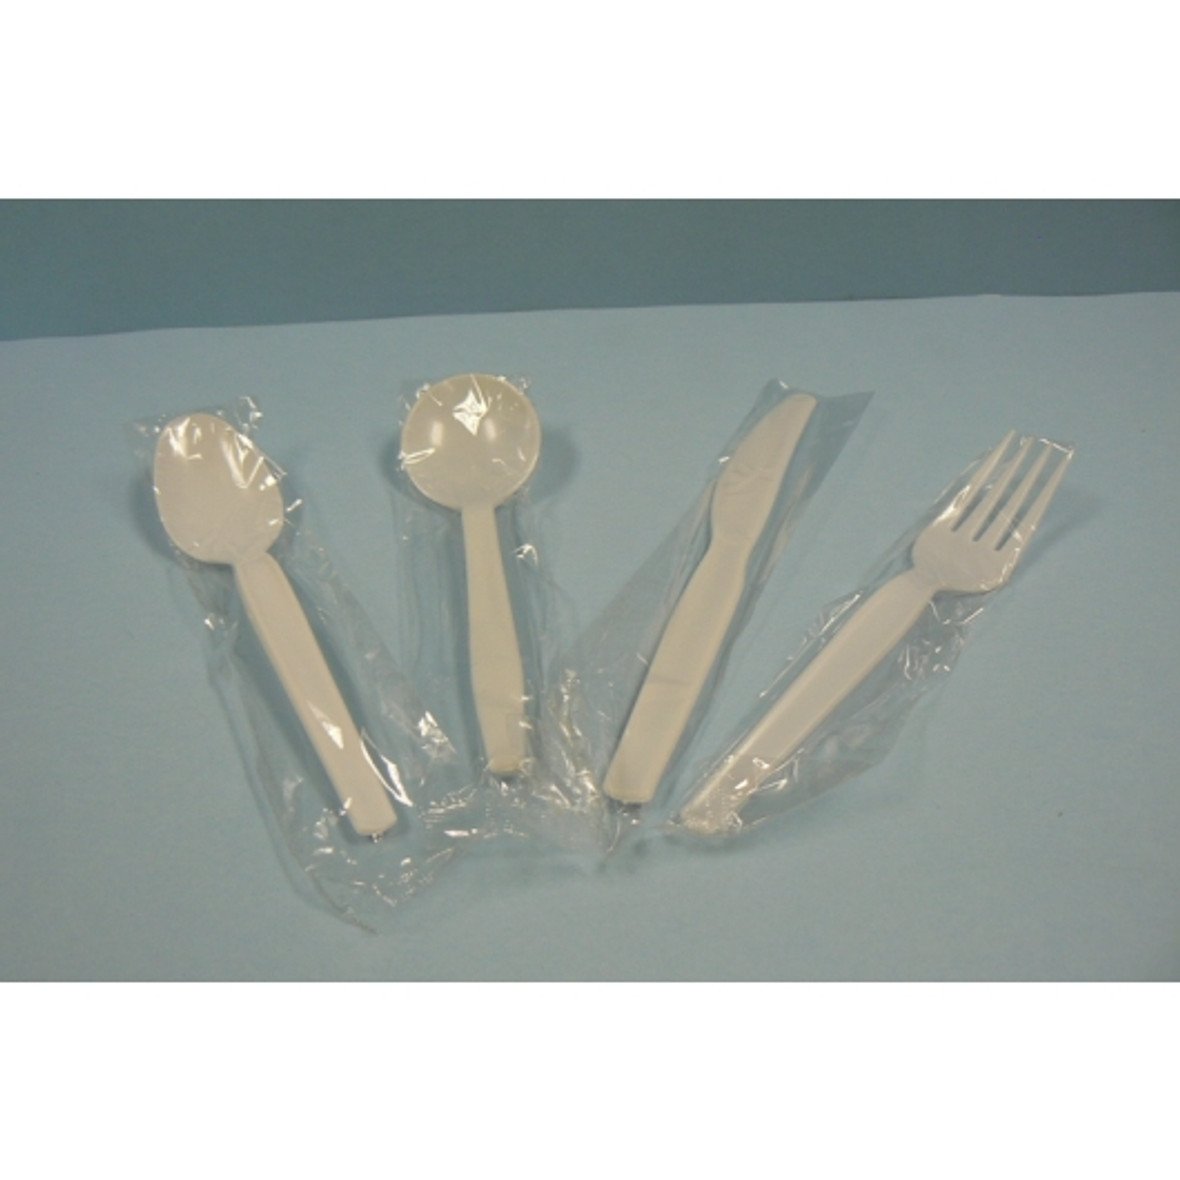 disposable spoon, fork, knife